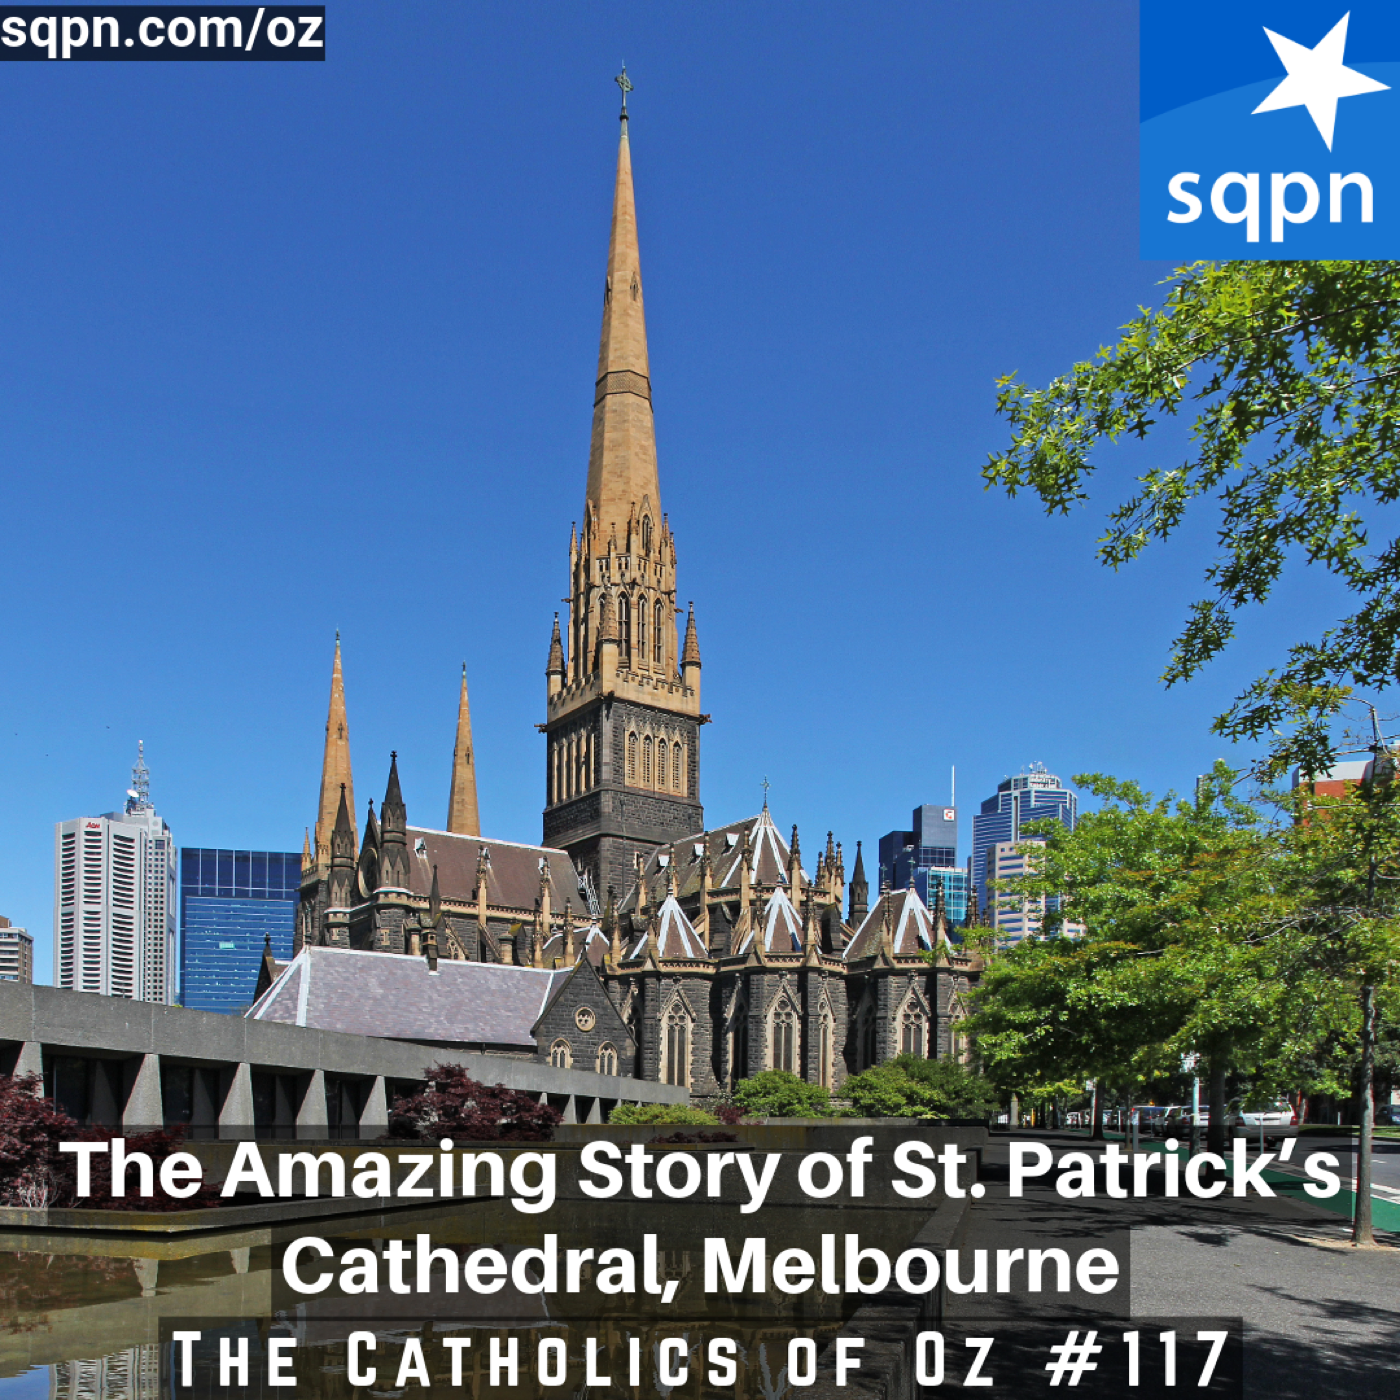 The Amazing Story of St. Patrick’s Cathedral, Melbourne